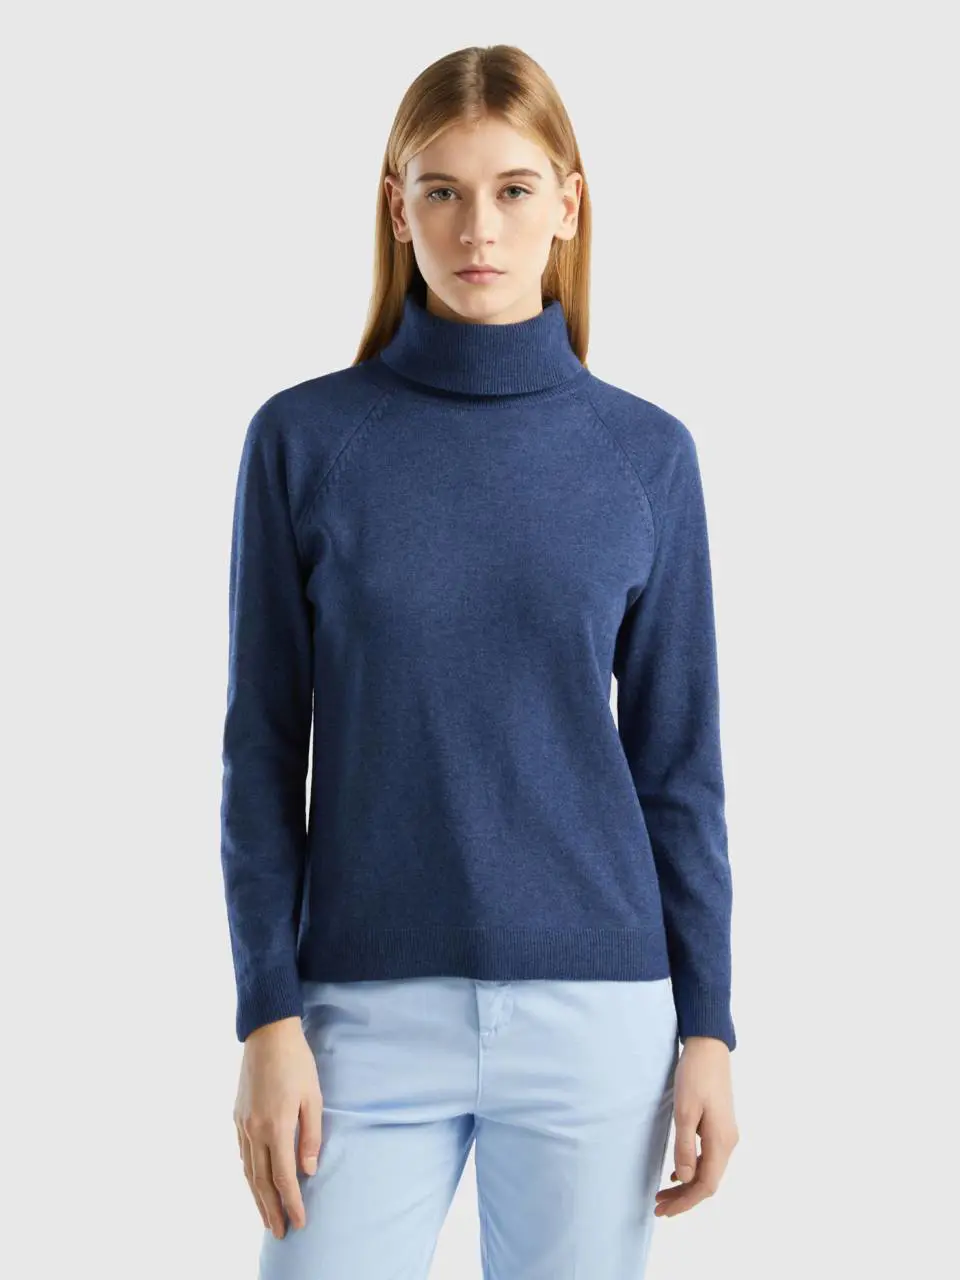 Benetton air force blue turtleneck sweater in cashmere and wool blend. 1